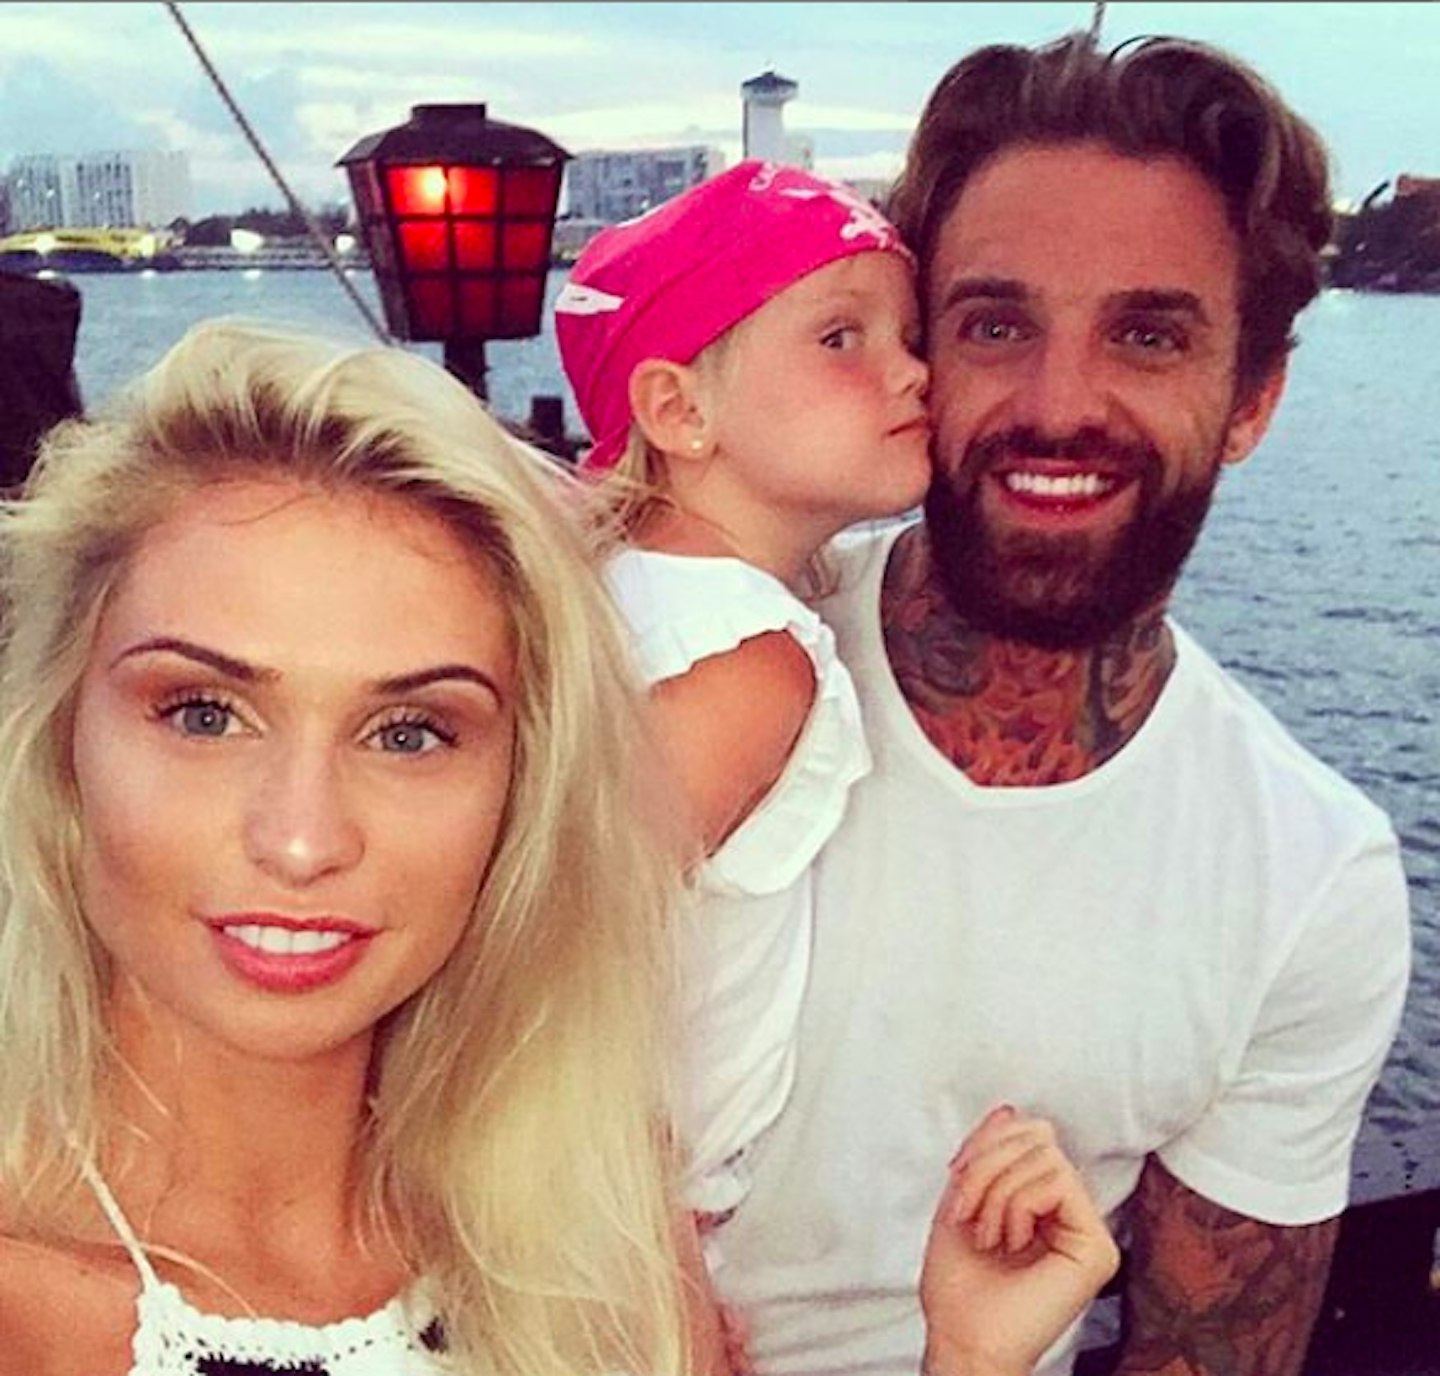 Aaron Chalmers and Talia Oatway